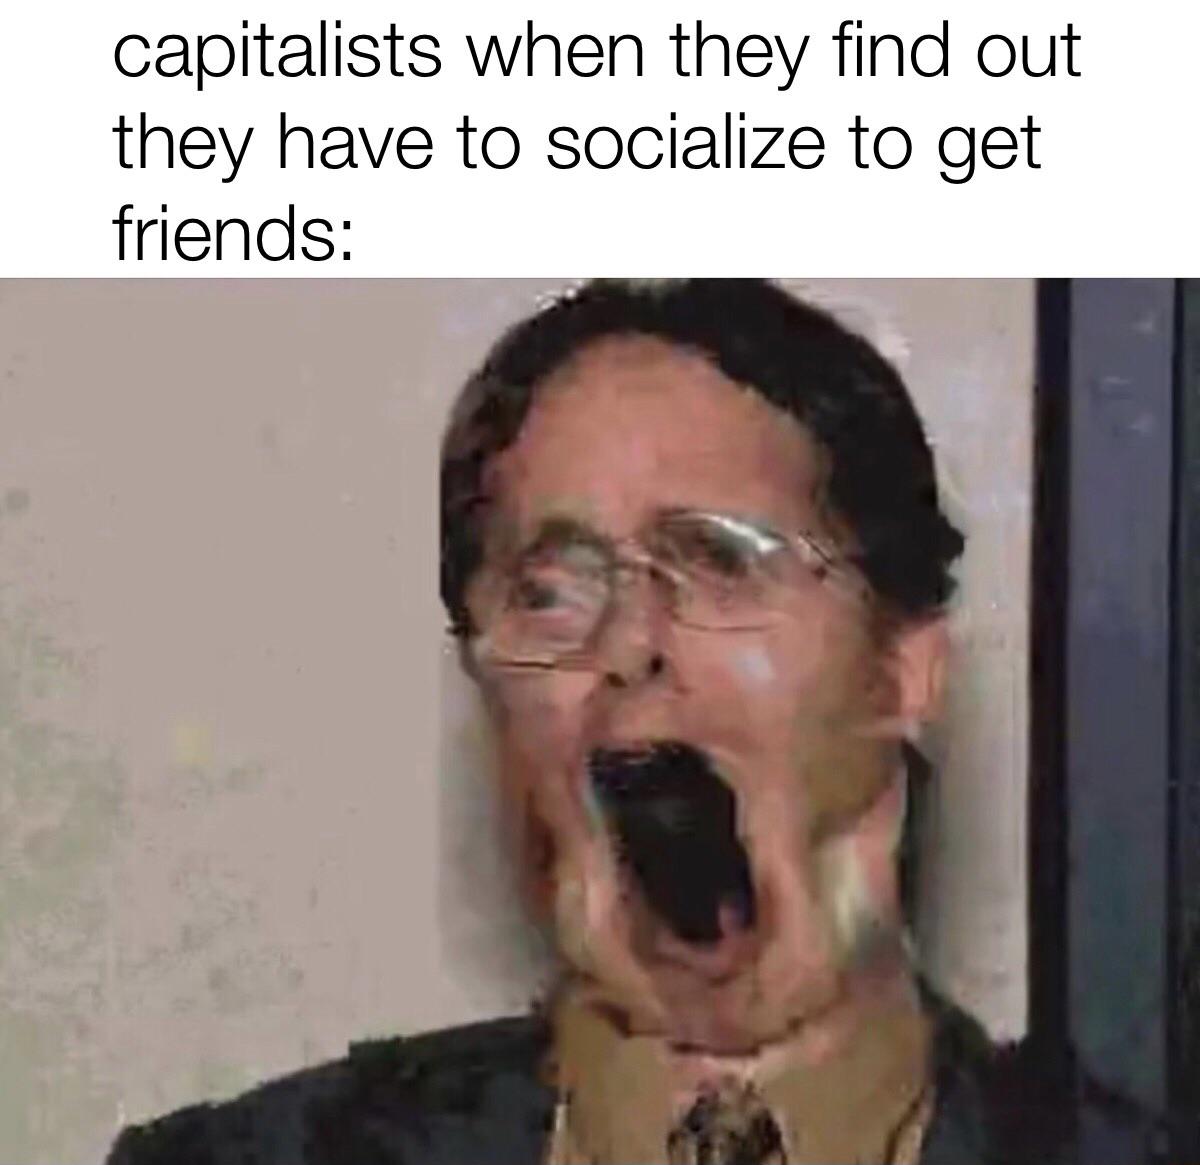 funny memes - wack memes - capitalists when they find out they have to socialize to get friends